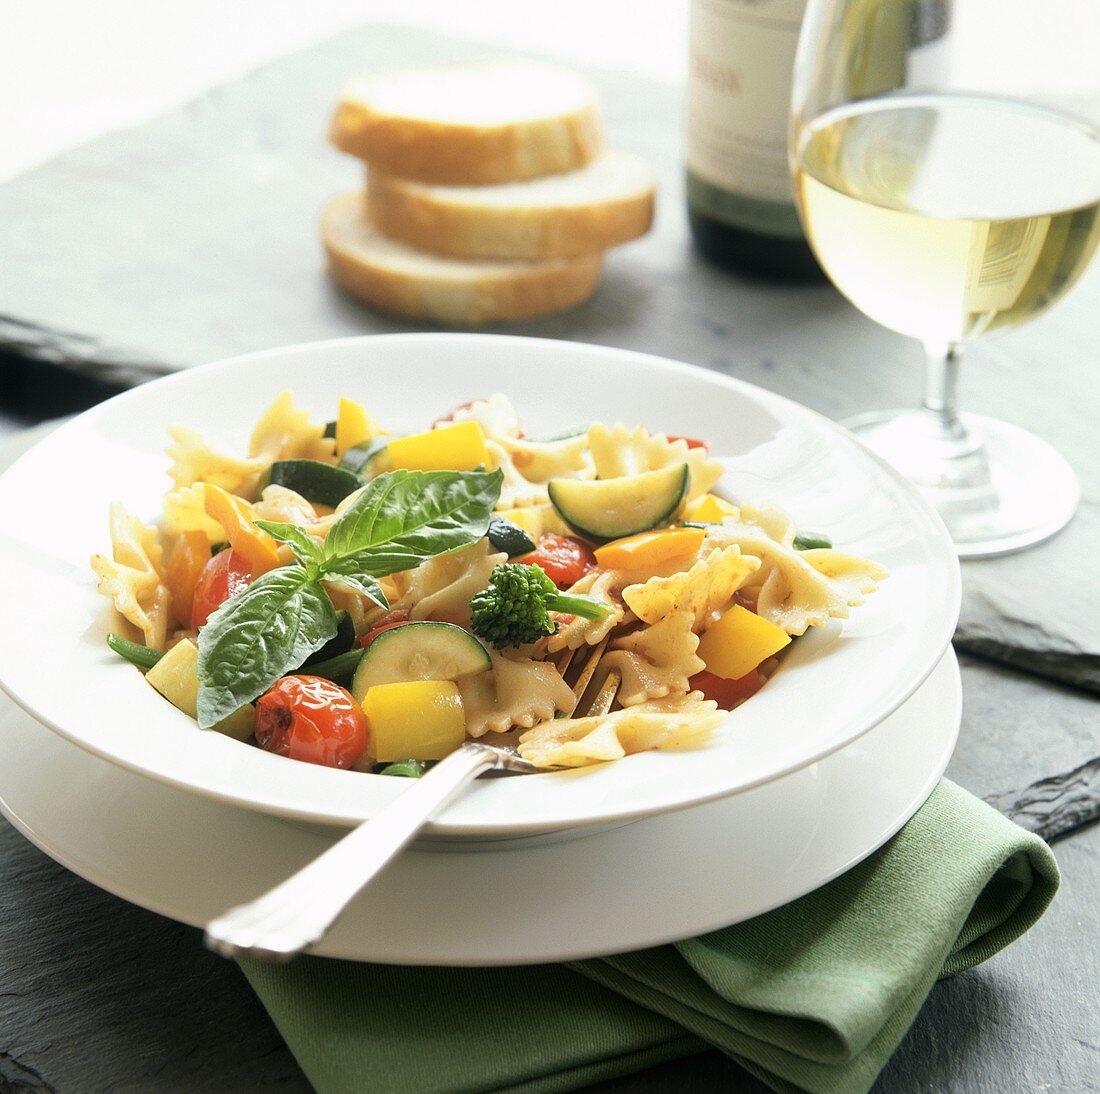 Farfalle alla toscana (Bow-tie pasta with vegetables & basil)